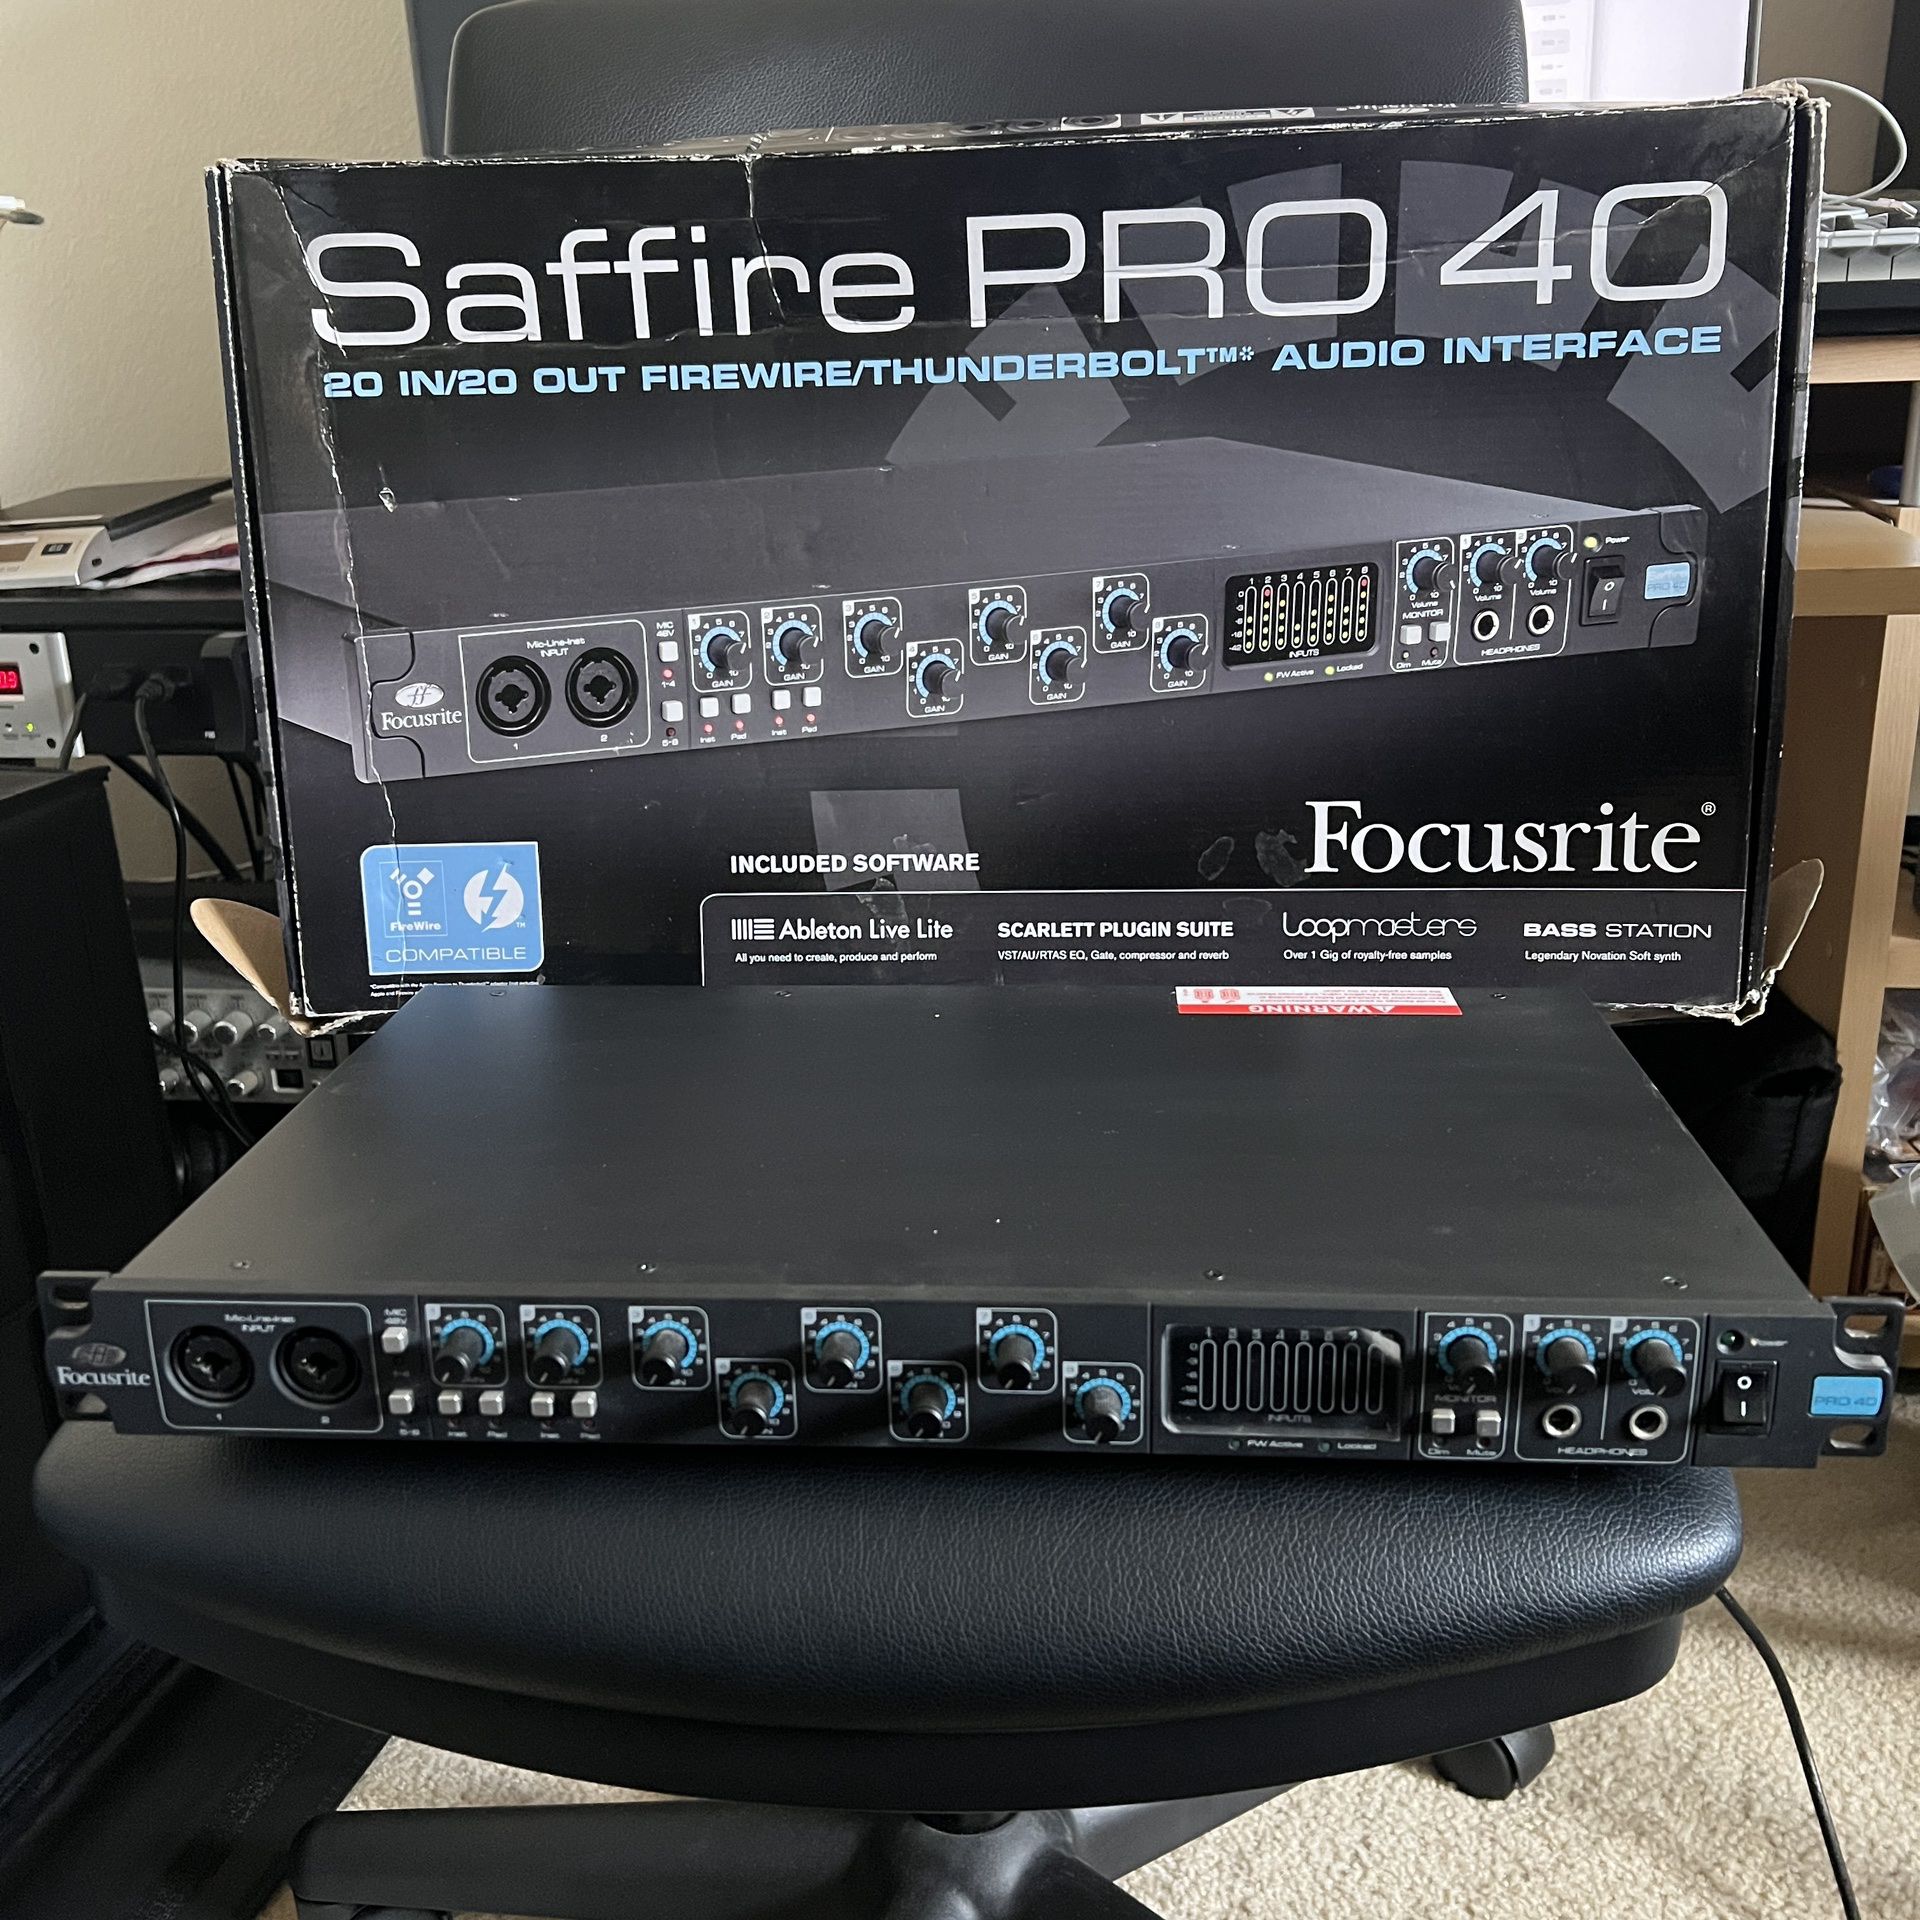 Pro　40　Needed　And　Focusrite　for　For　in　Artesia,　Cable　Sale　Saffire　Adapters　CA　With　Thunderbolt　OfferUp